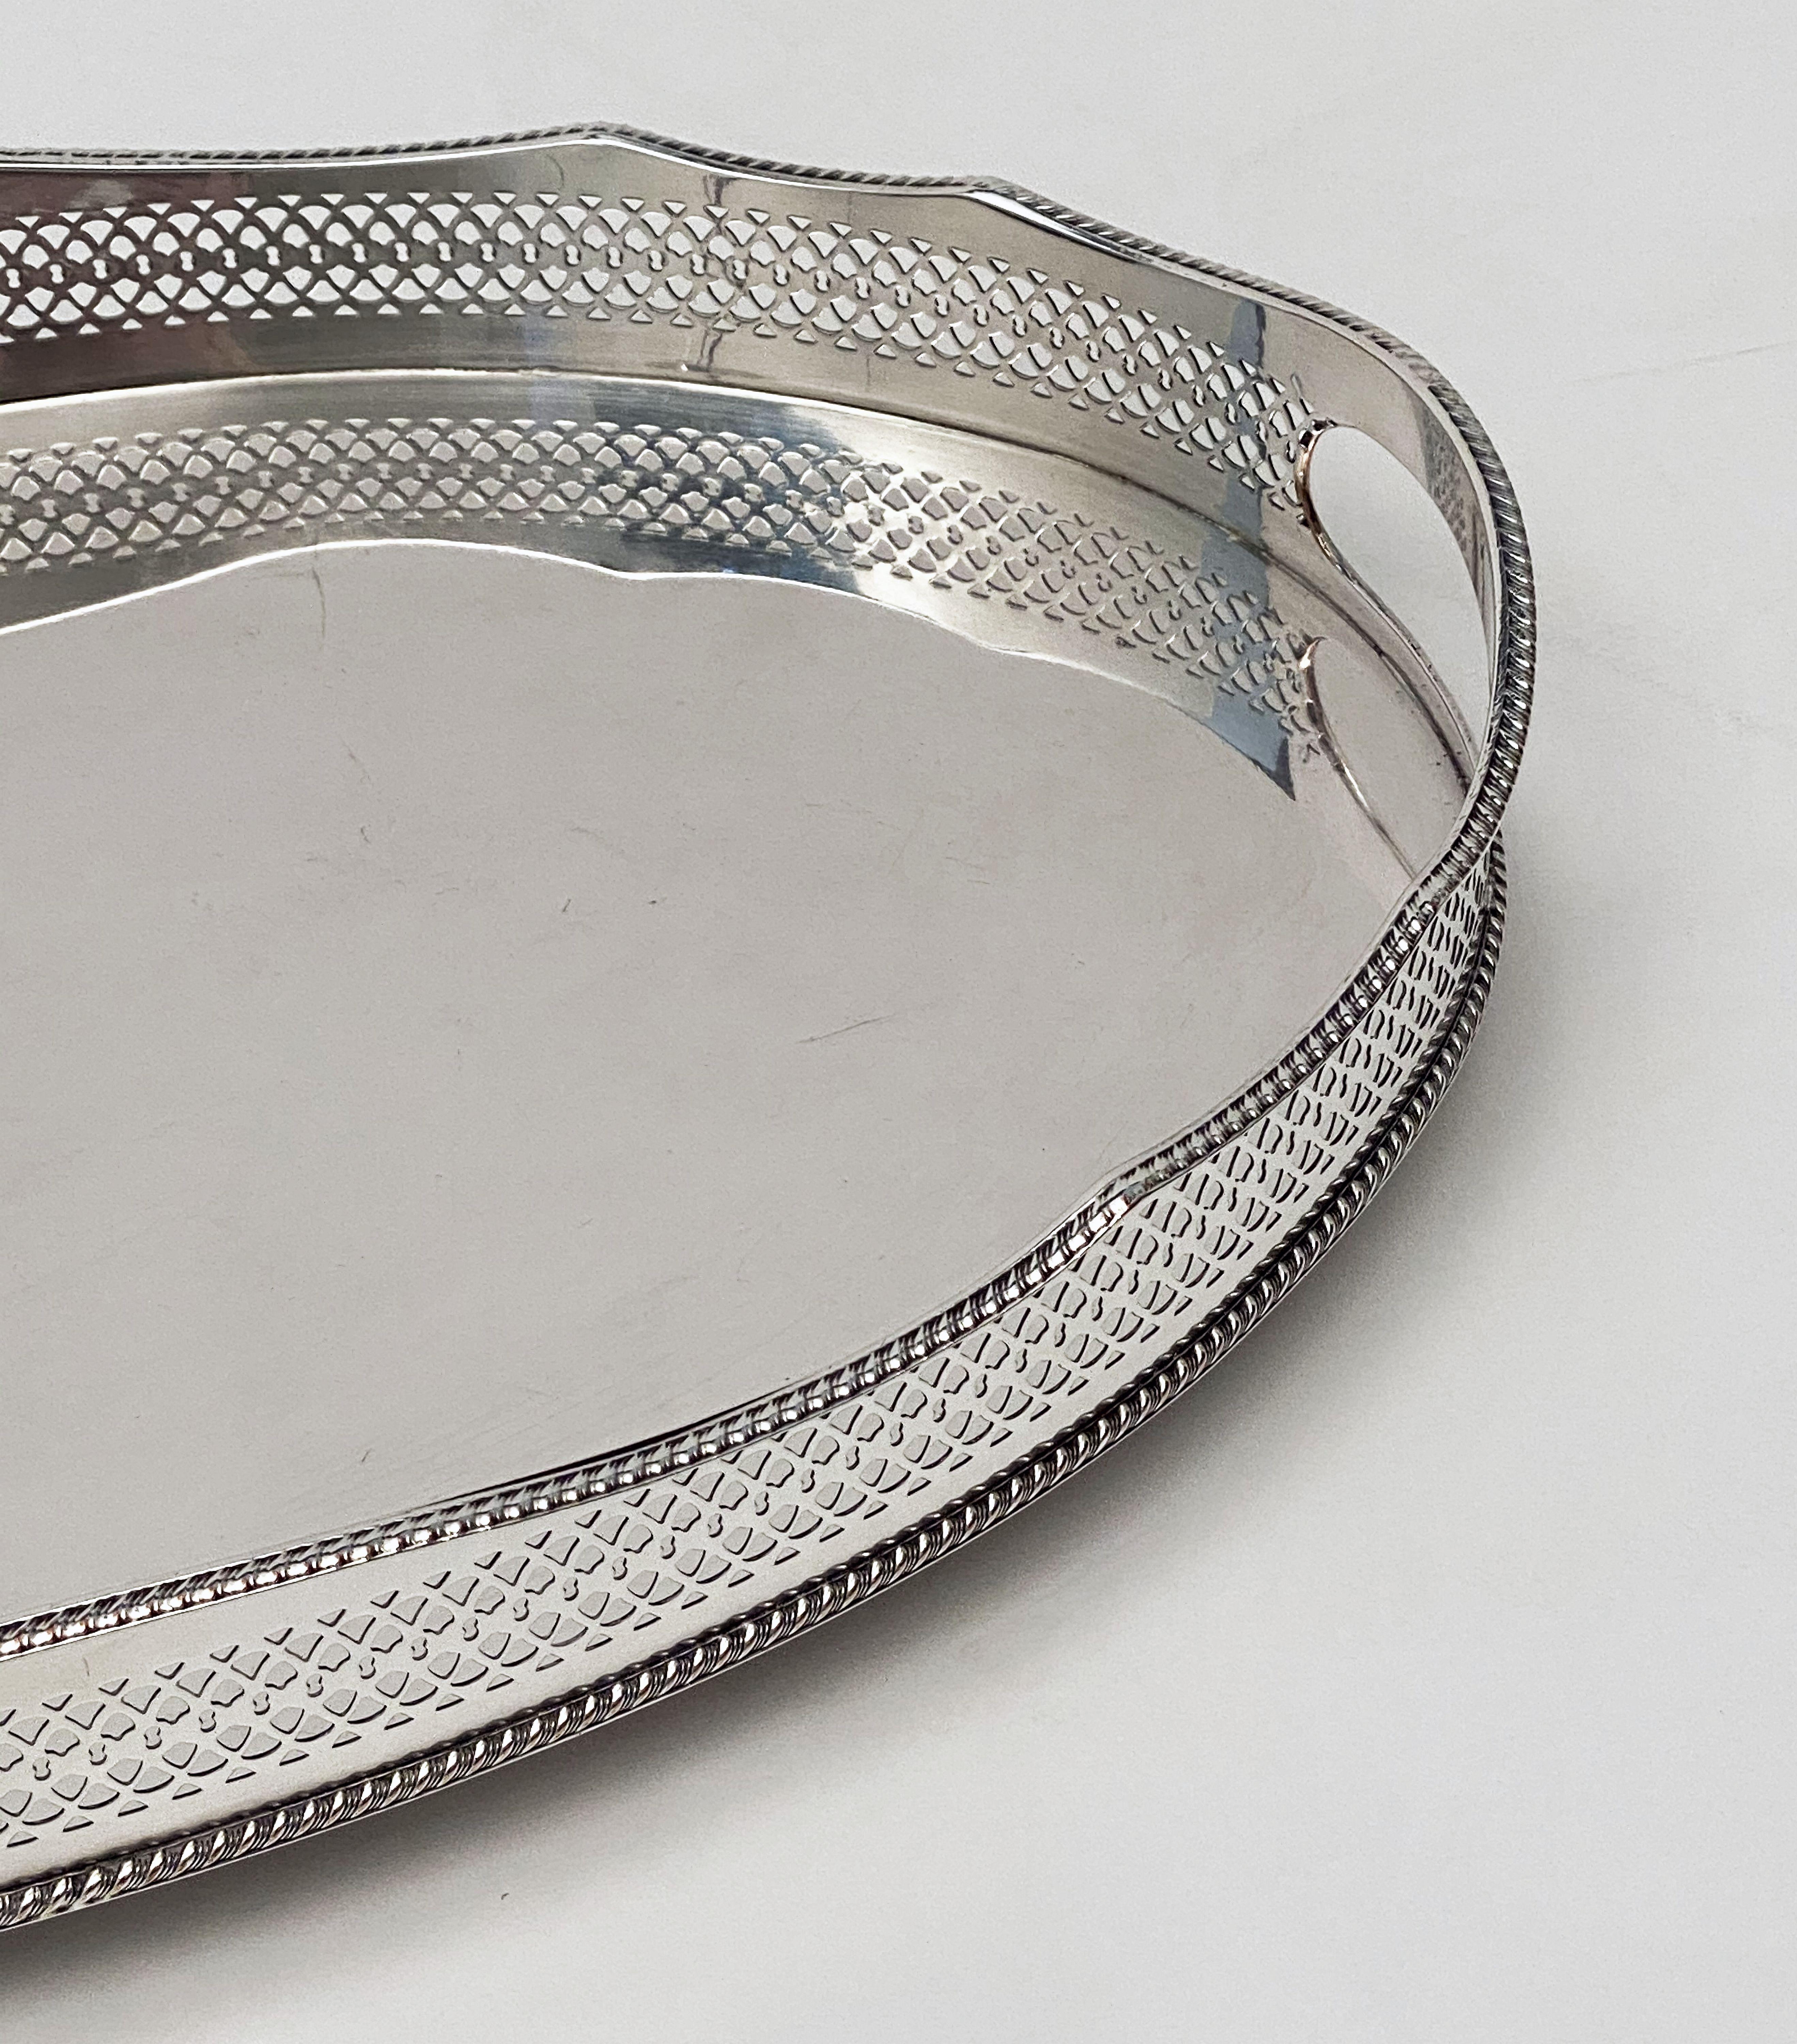 Metal Pair of English Silver Oval Gallery Serving or Drinks Trays 'Priced as a Pair'